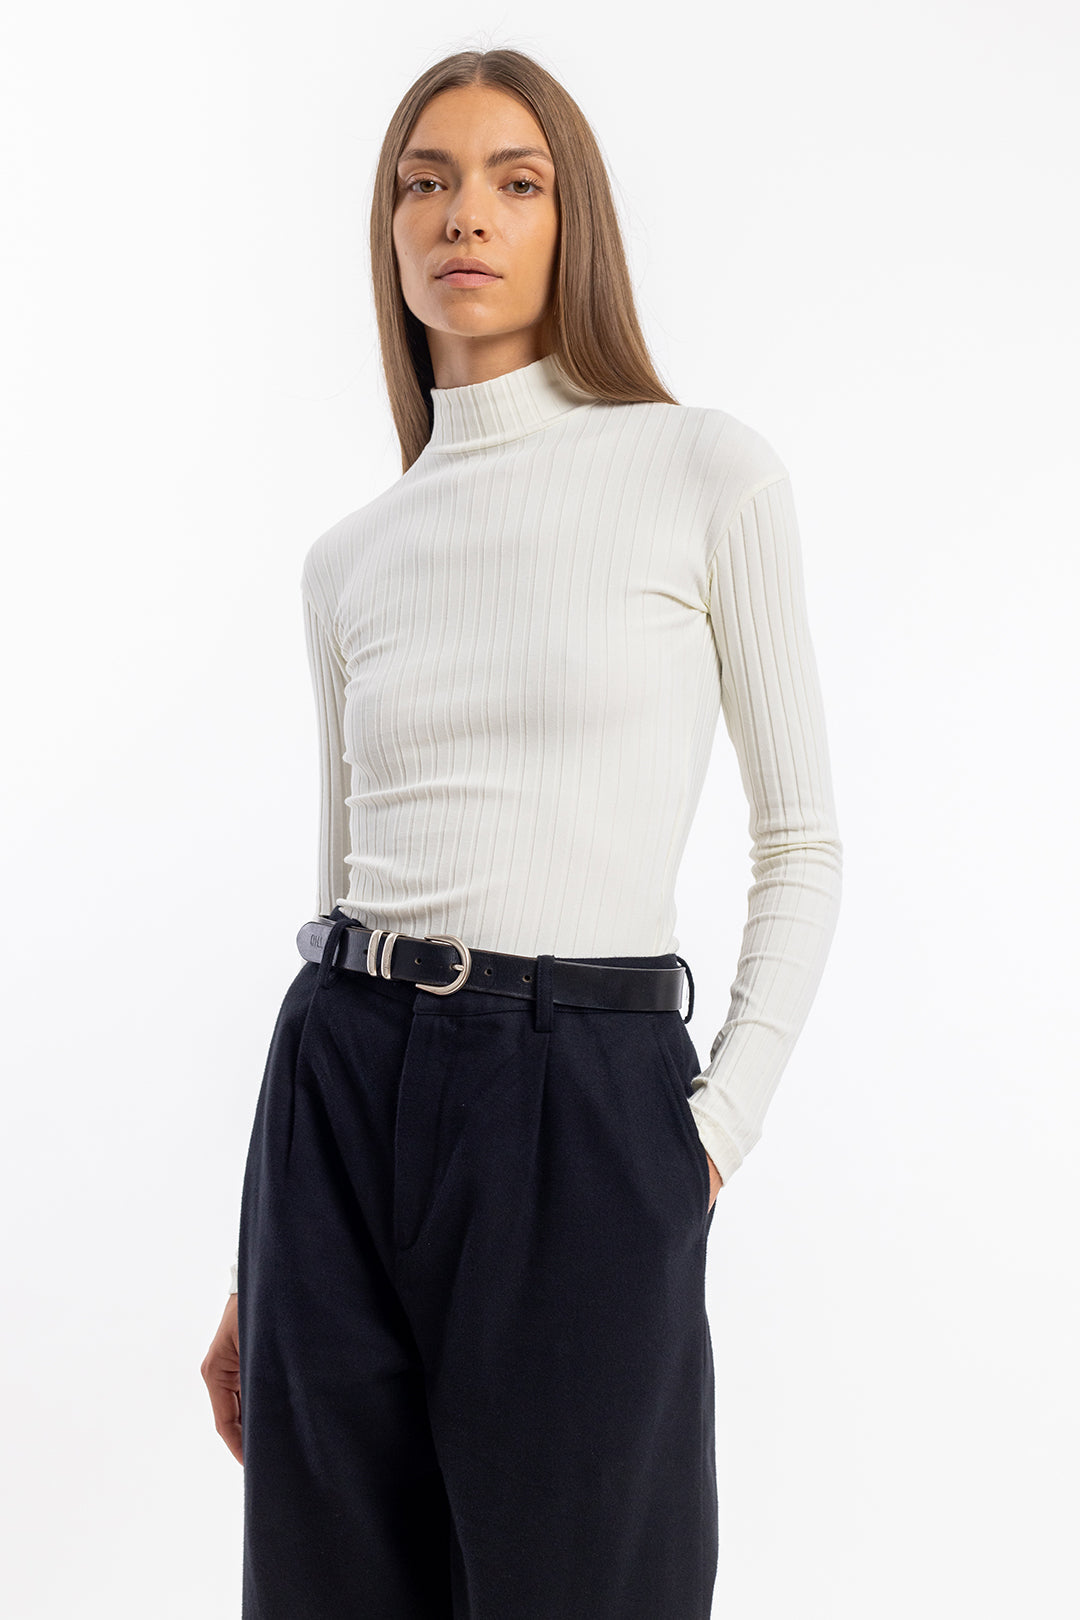 White, ribbed long-sleeved shirt made of organic cotton from Rotholz